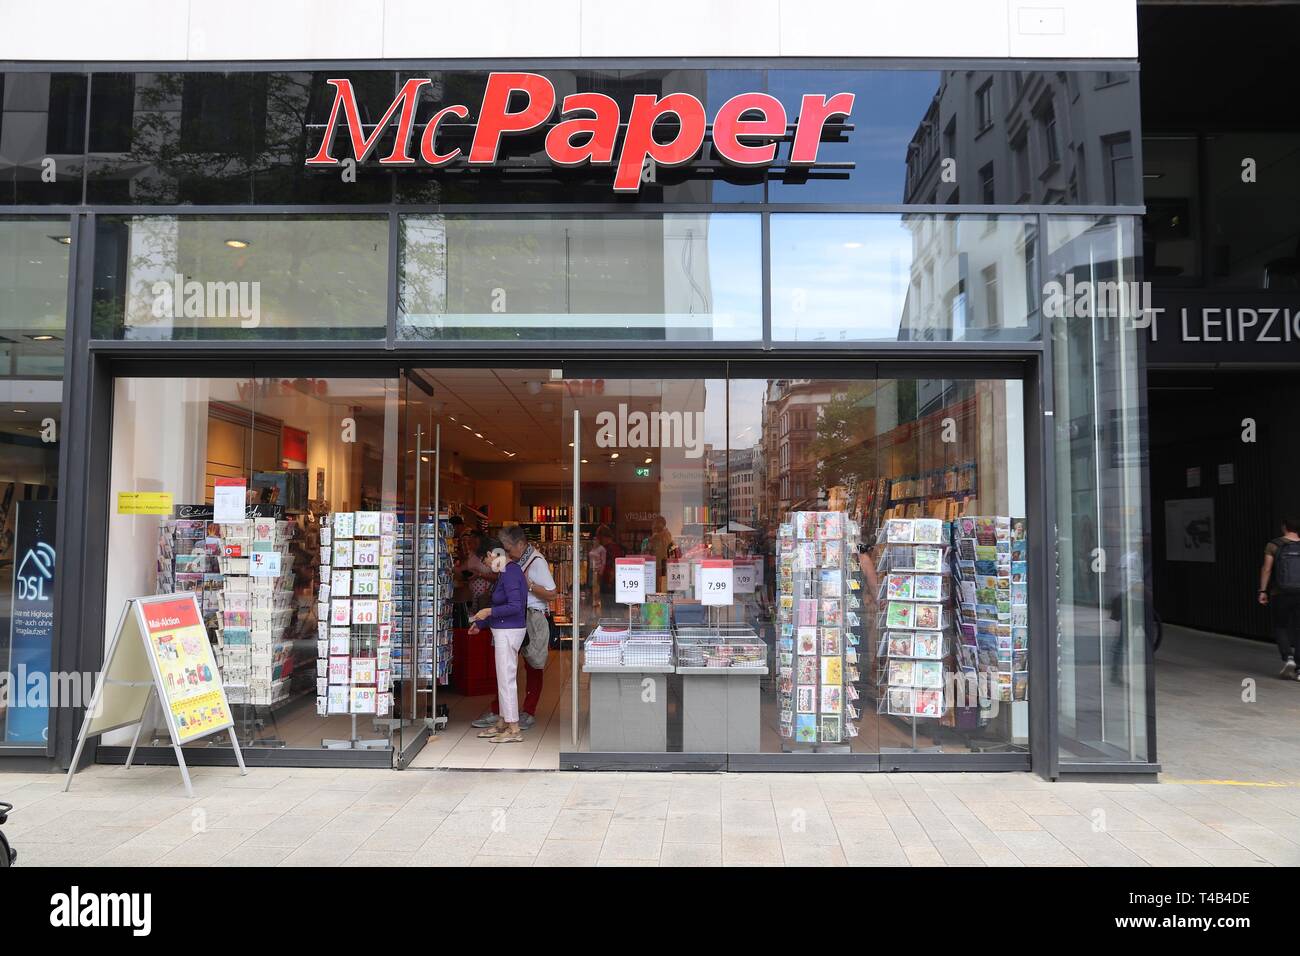 Page 2 Stationery Shop Exterior High Resolution Stock Photography And Images Alamy